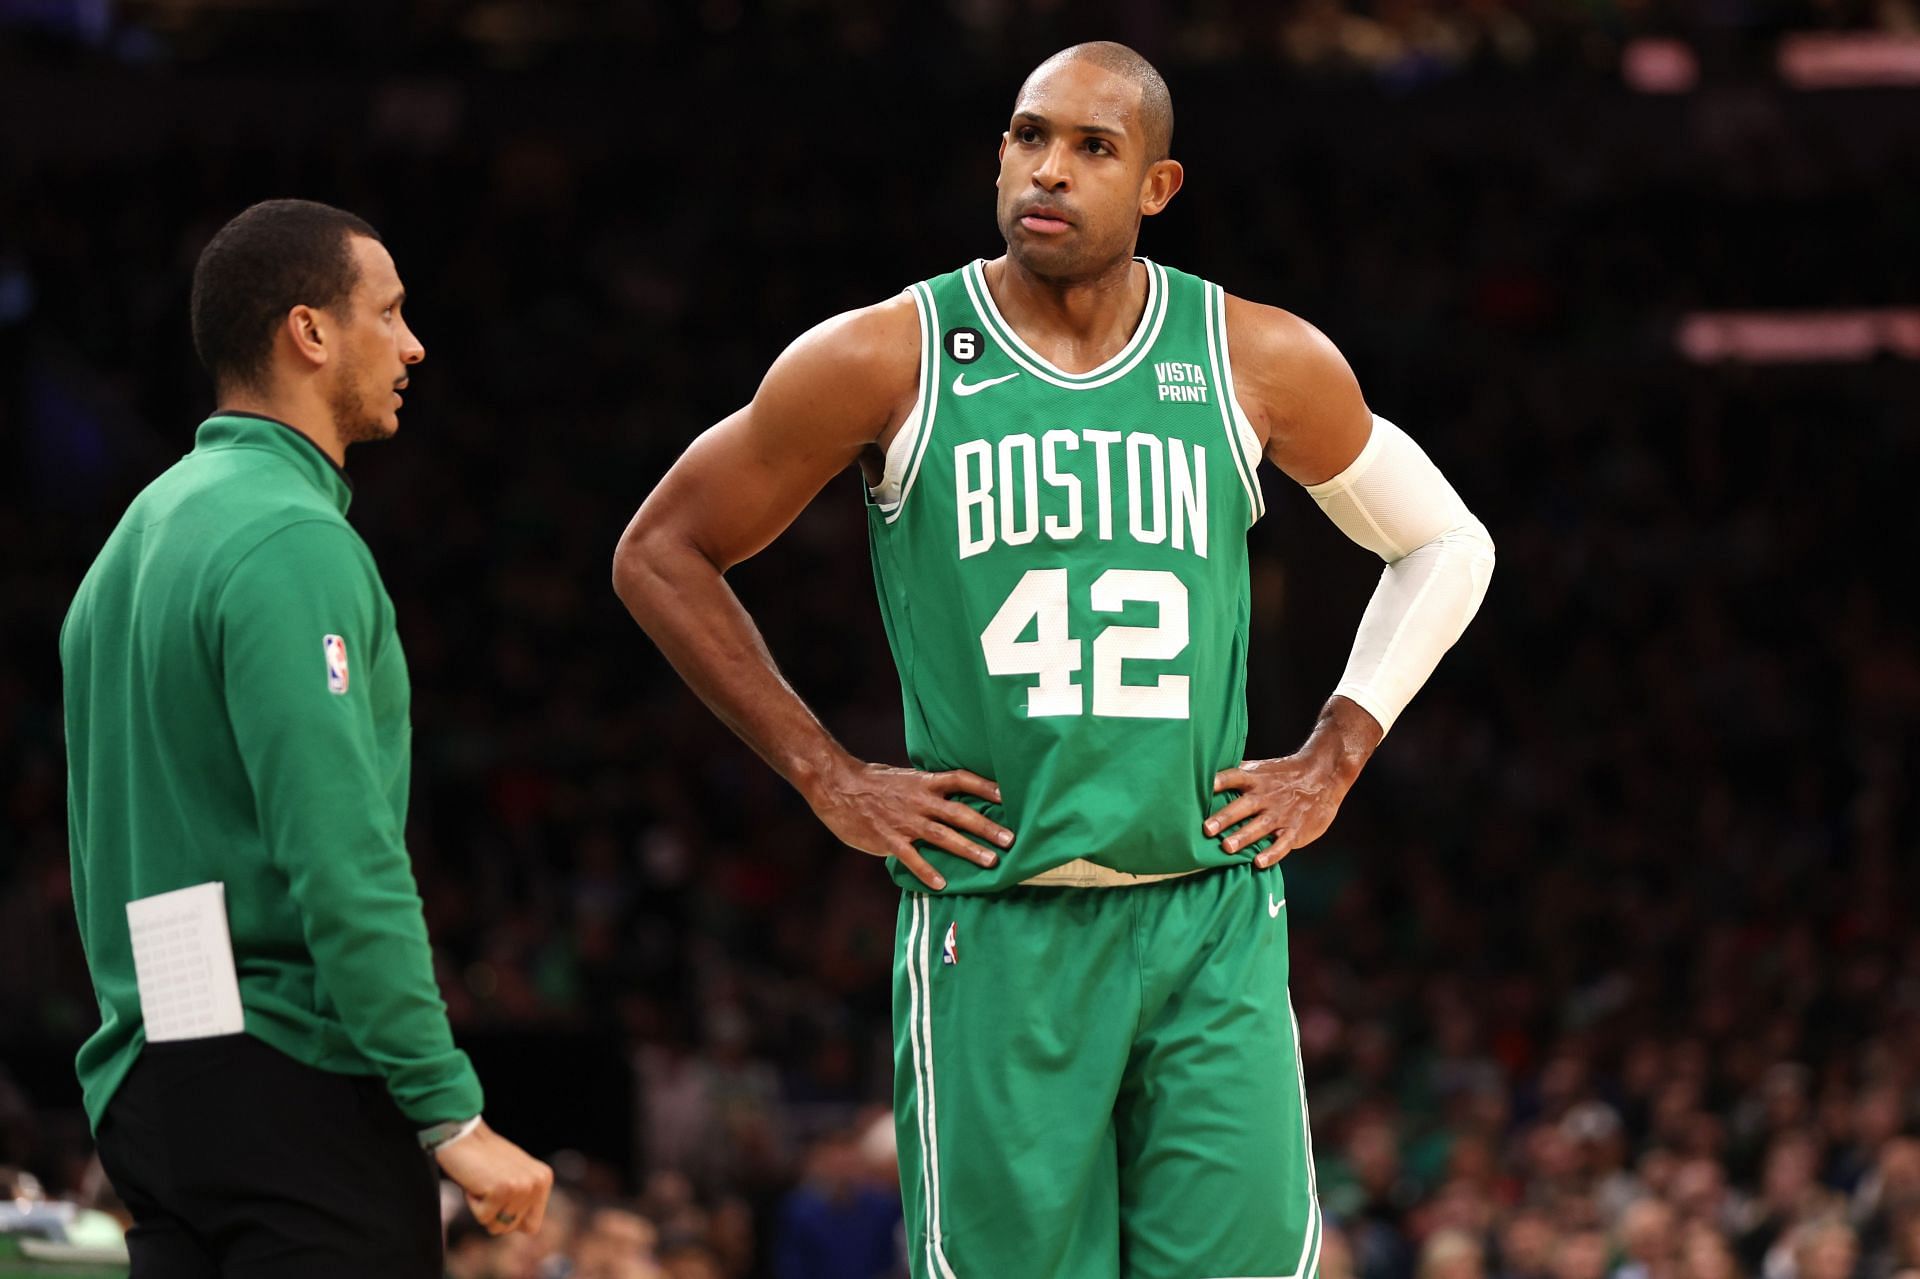 Boston Celtics: Al Horford continues to produce clutch moments